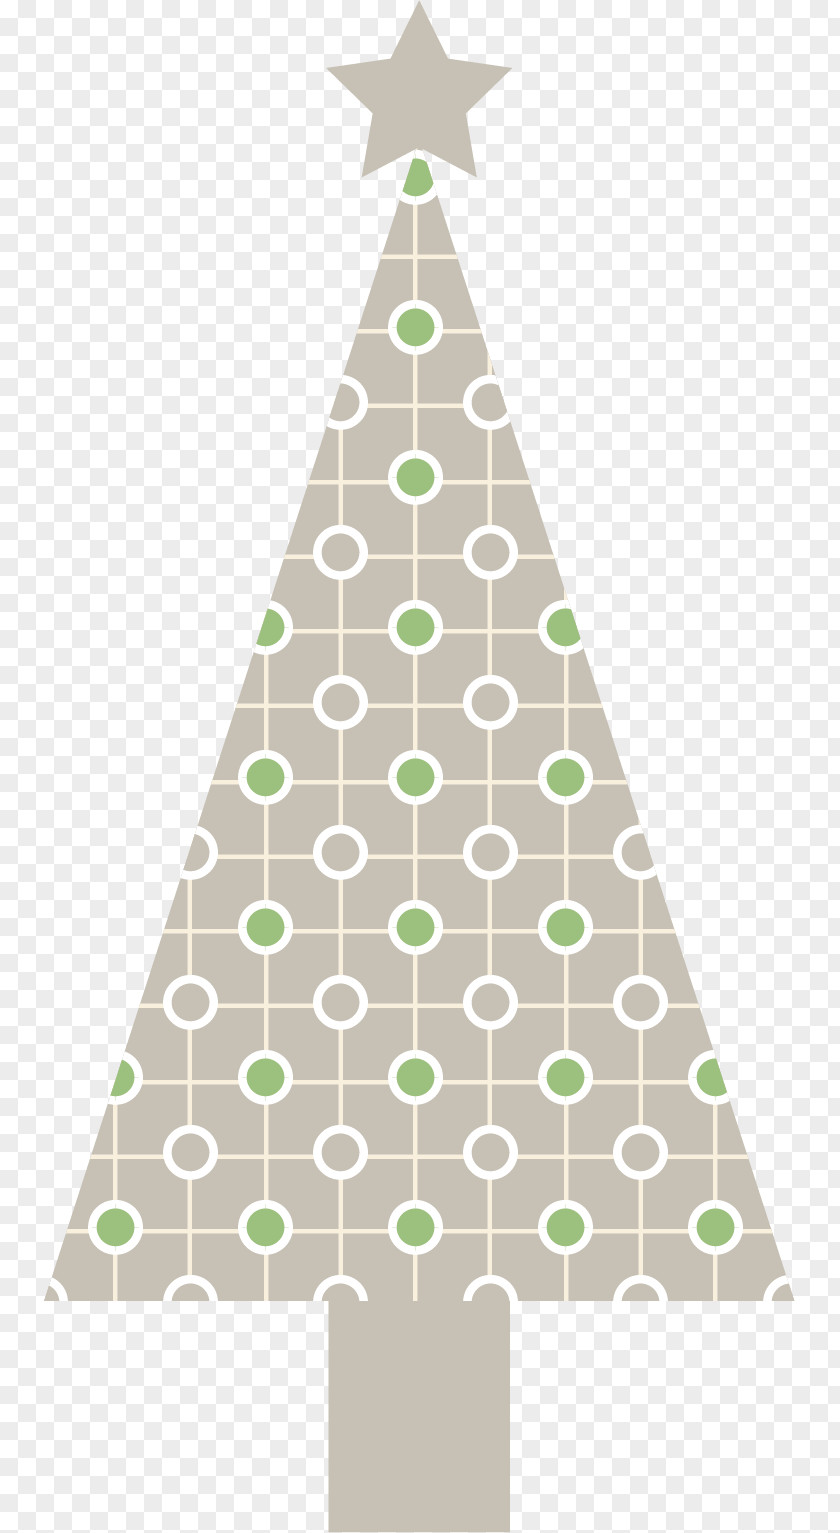 Christmas Fashion Elements Spruce Tree Fir Decoration PNG